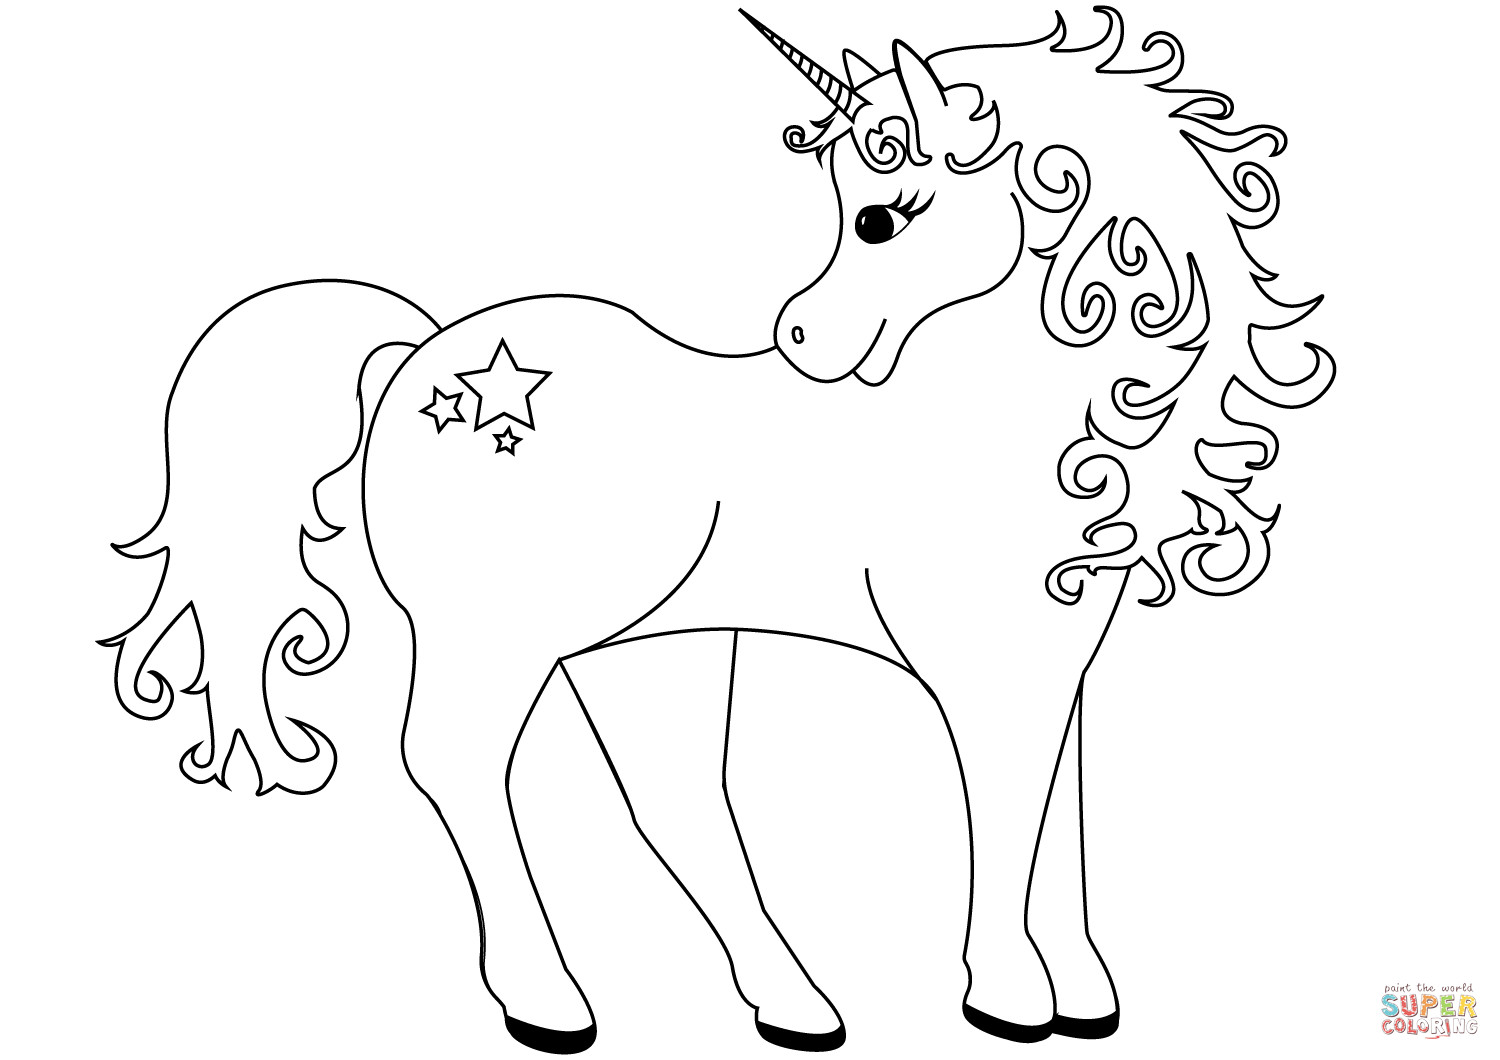 Free Printable Coloring Pages Of Unicorns
 Lovely Unicorn coloring page